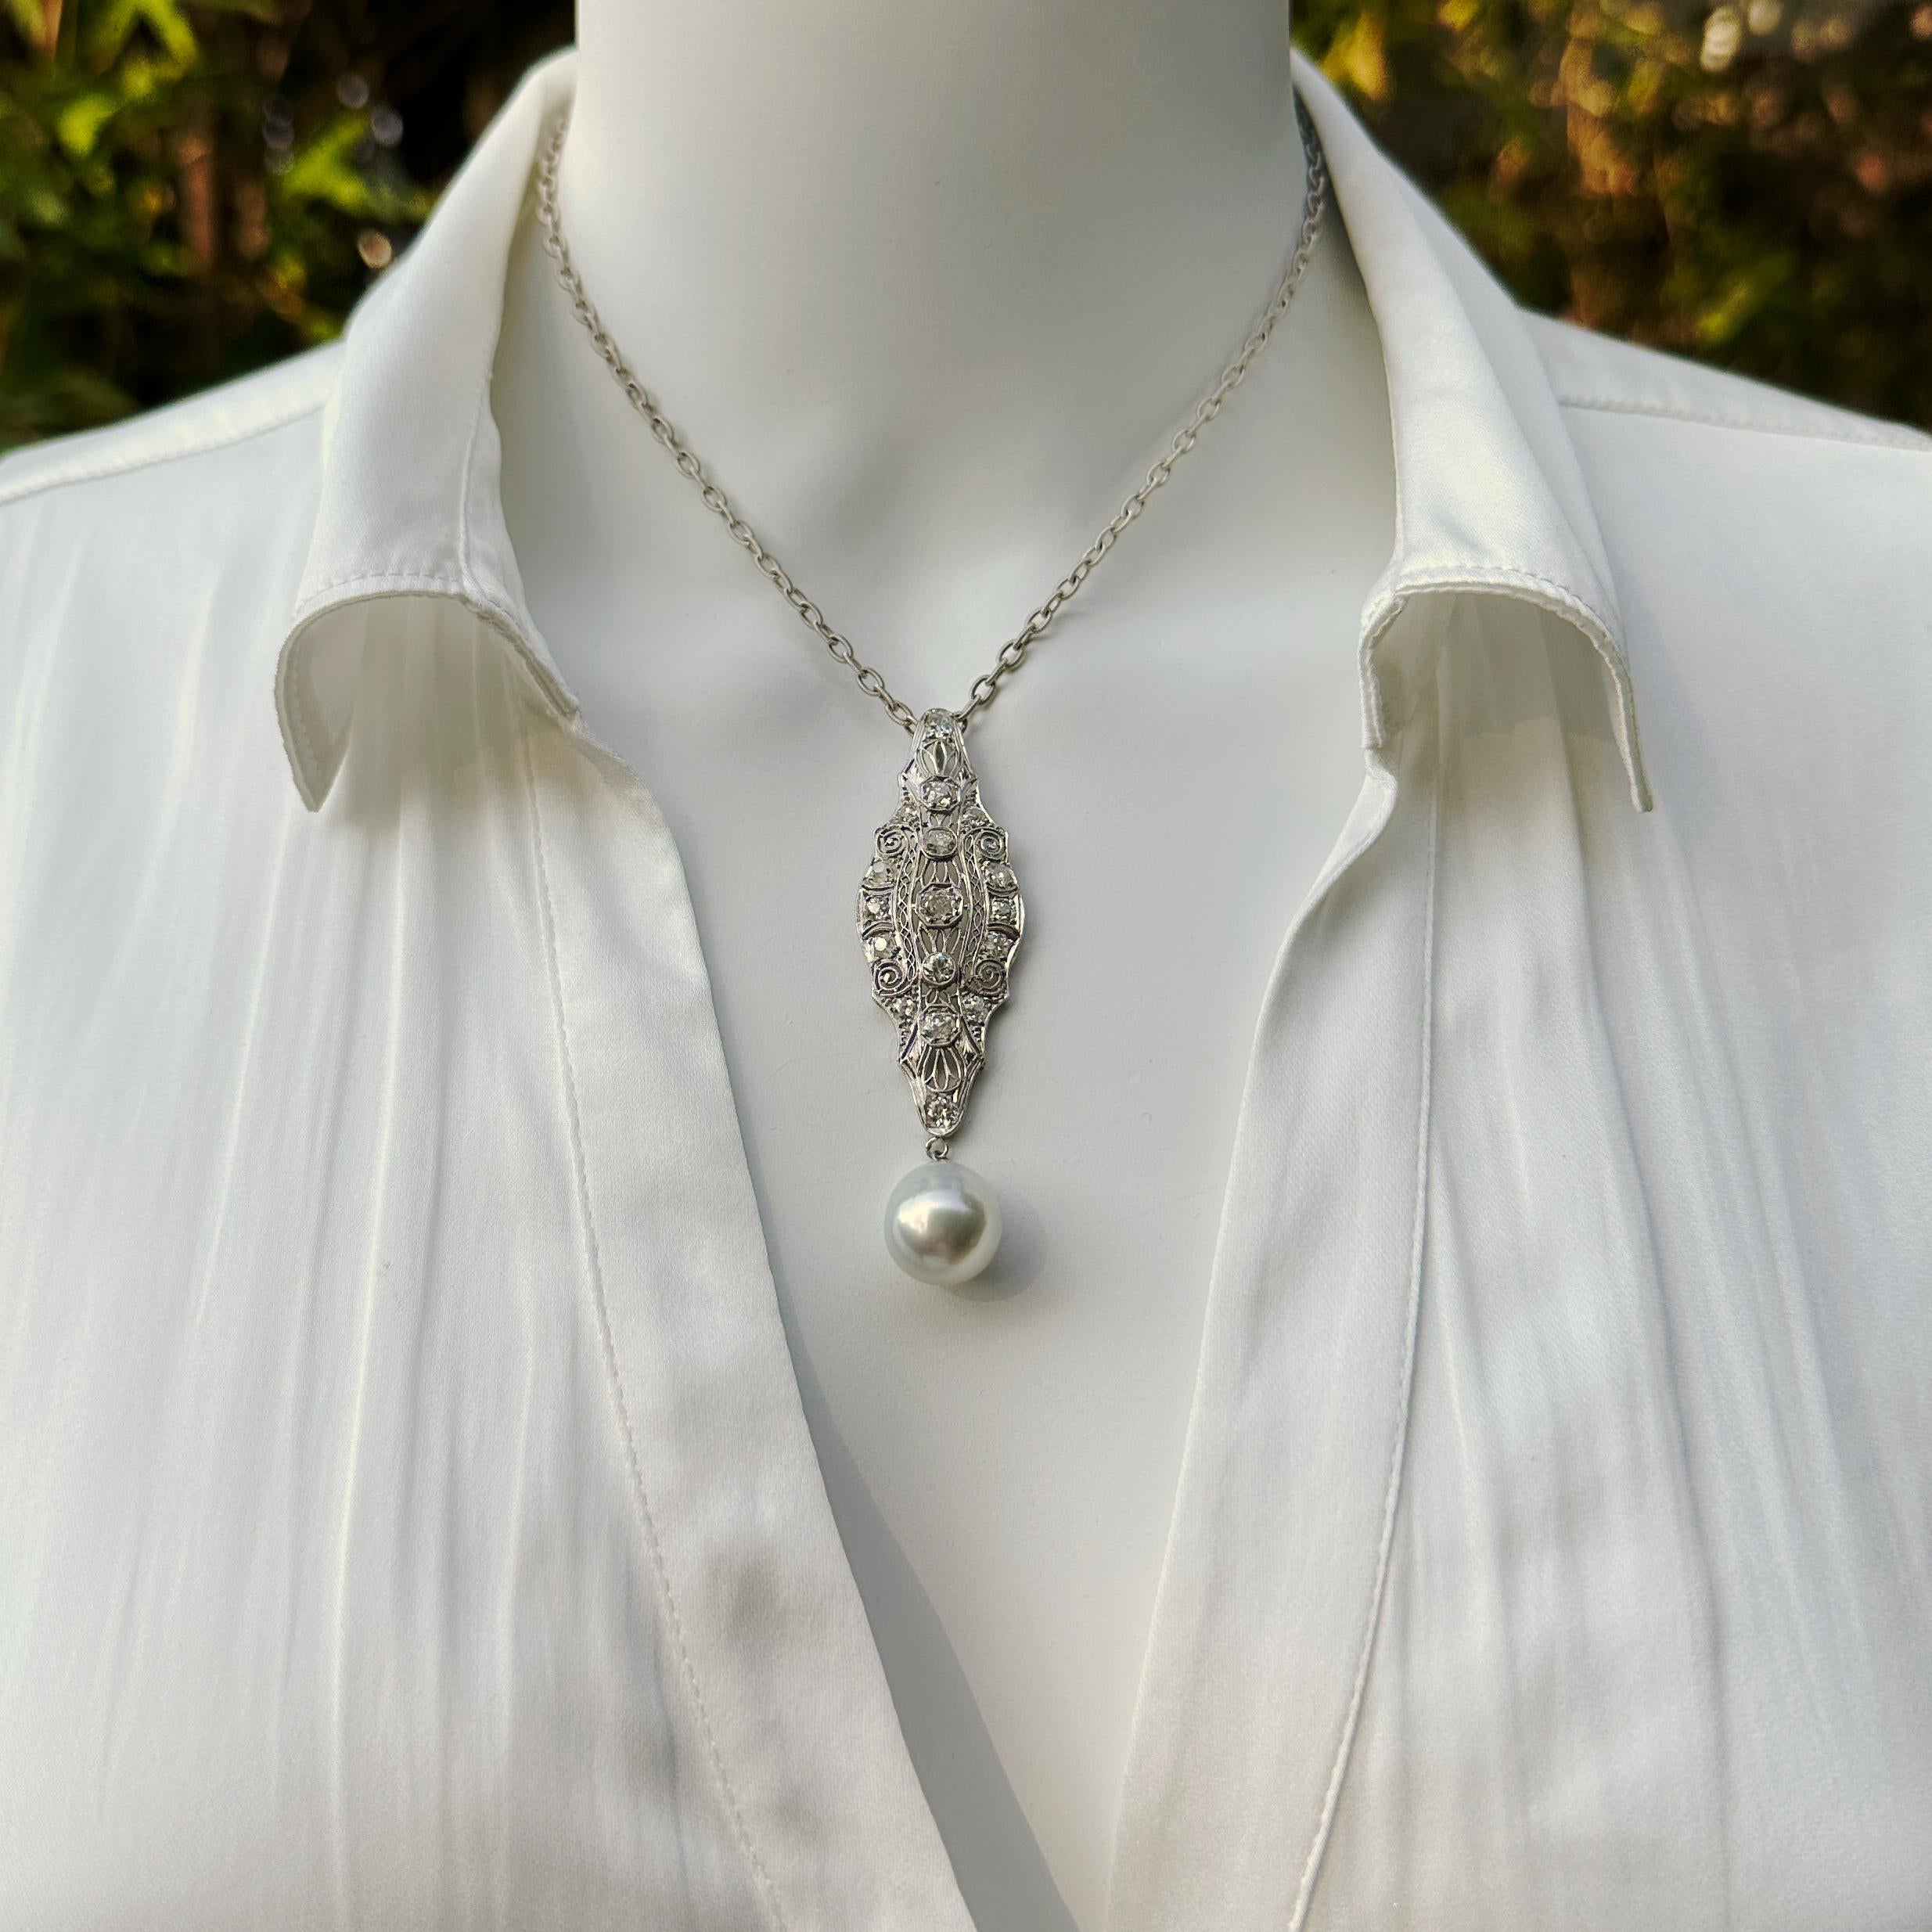 Eytan Brandes made the ultimate one-of-a-kind statement pendant using a traditional ladies diamond brooch and a gorgeous white South Sea pearl.  

The standout feature of this pendant, besides the pearl, is the array of old cut diamonds.  We